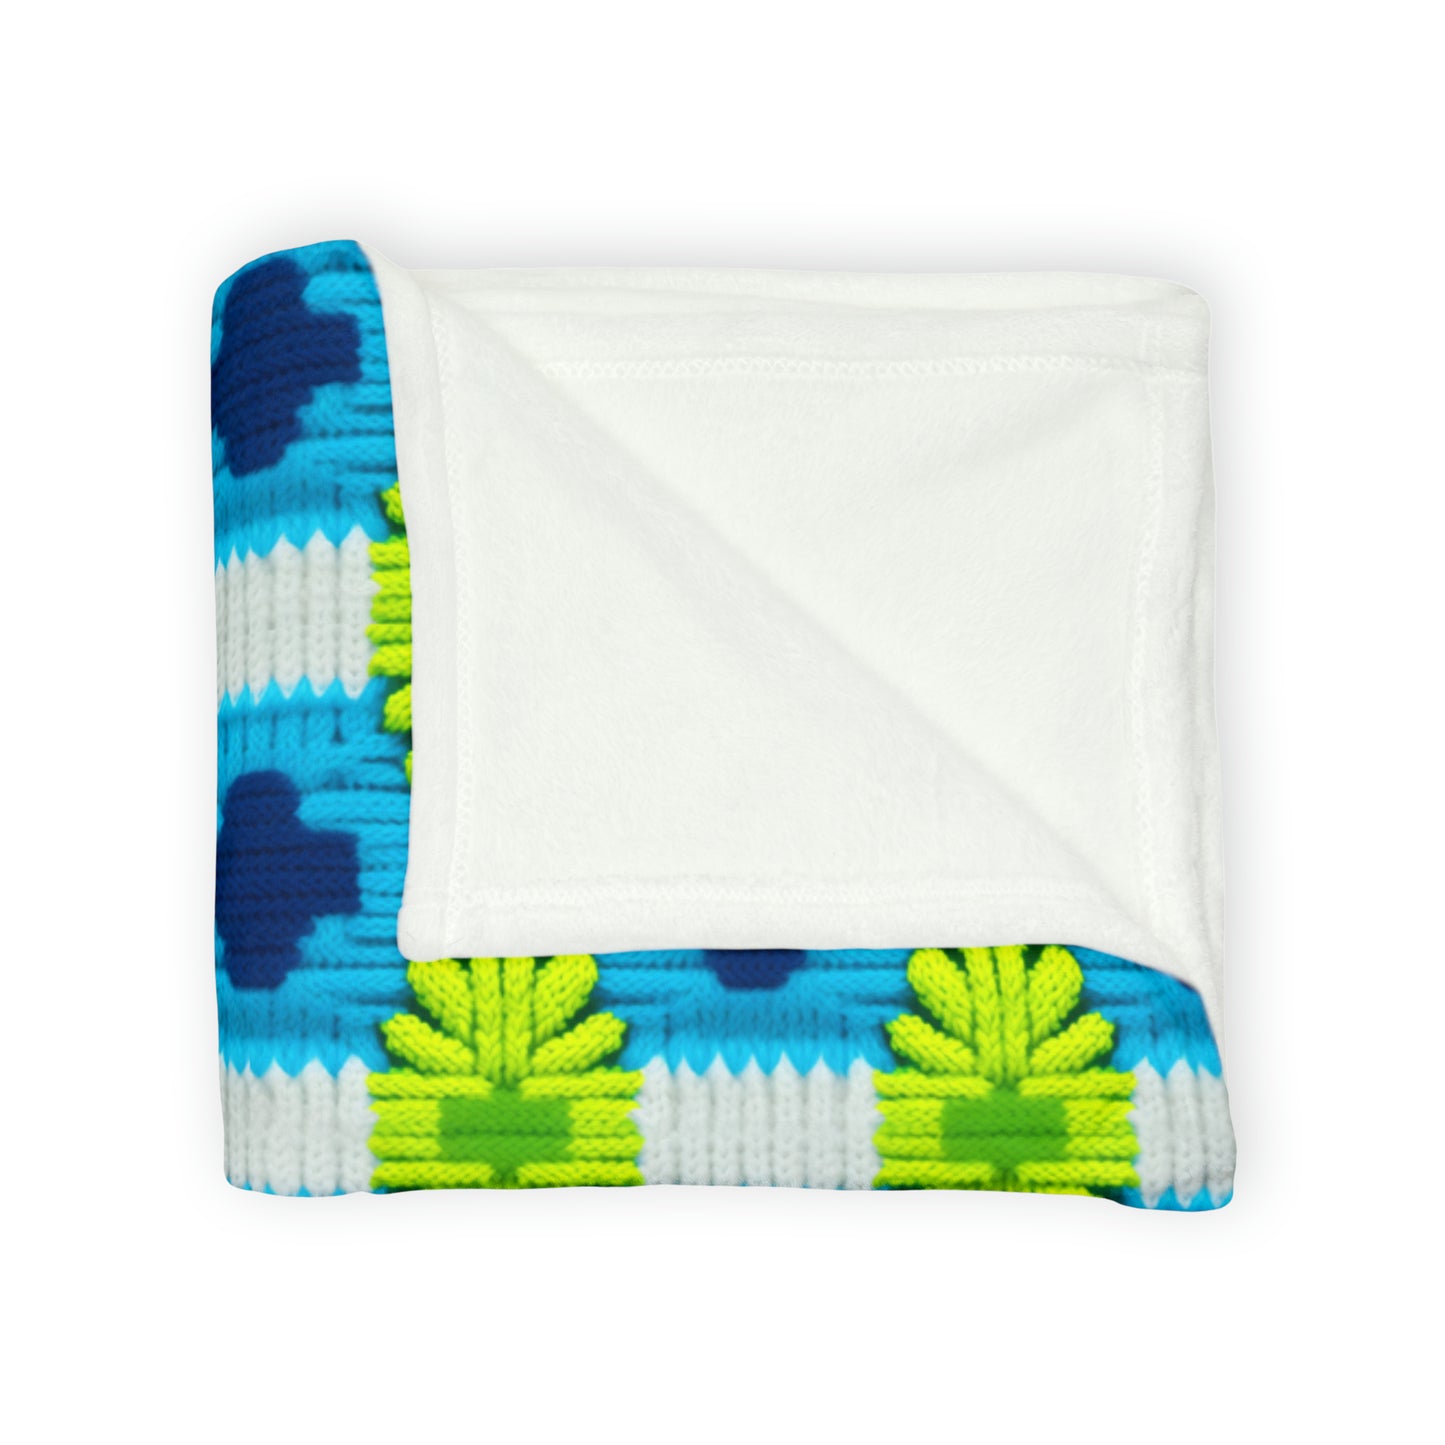 Surface Beach Volleyball Club Soft Polyester Blanket